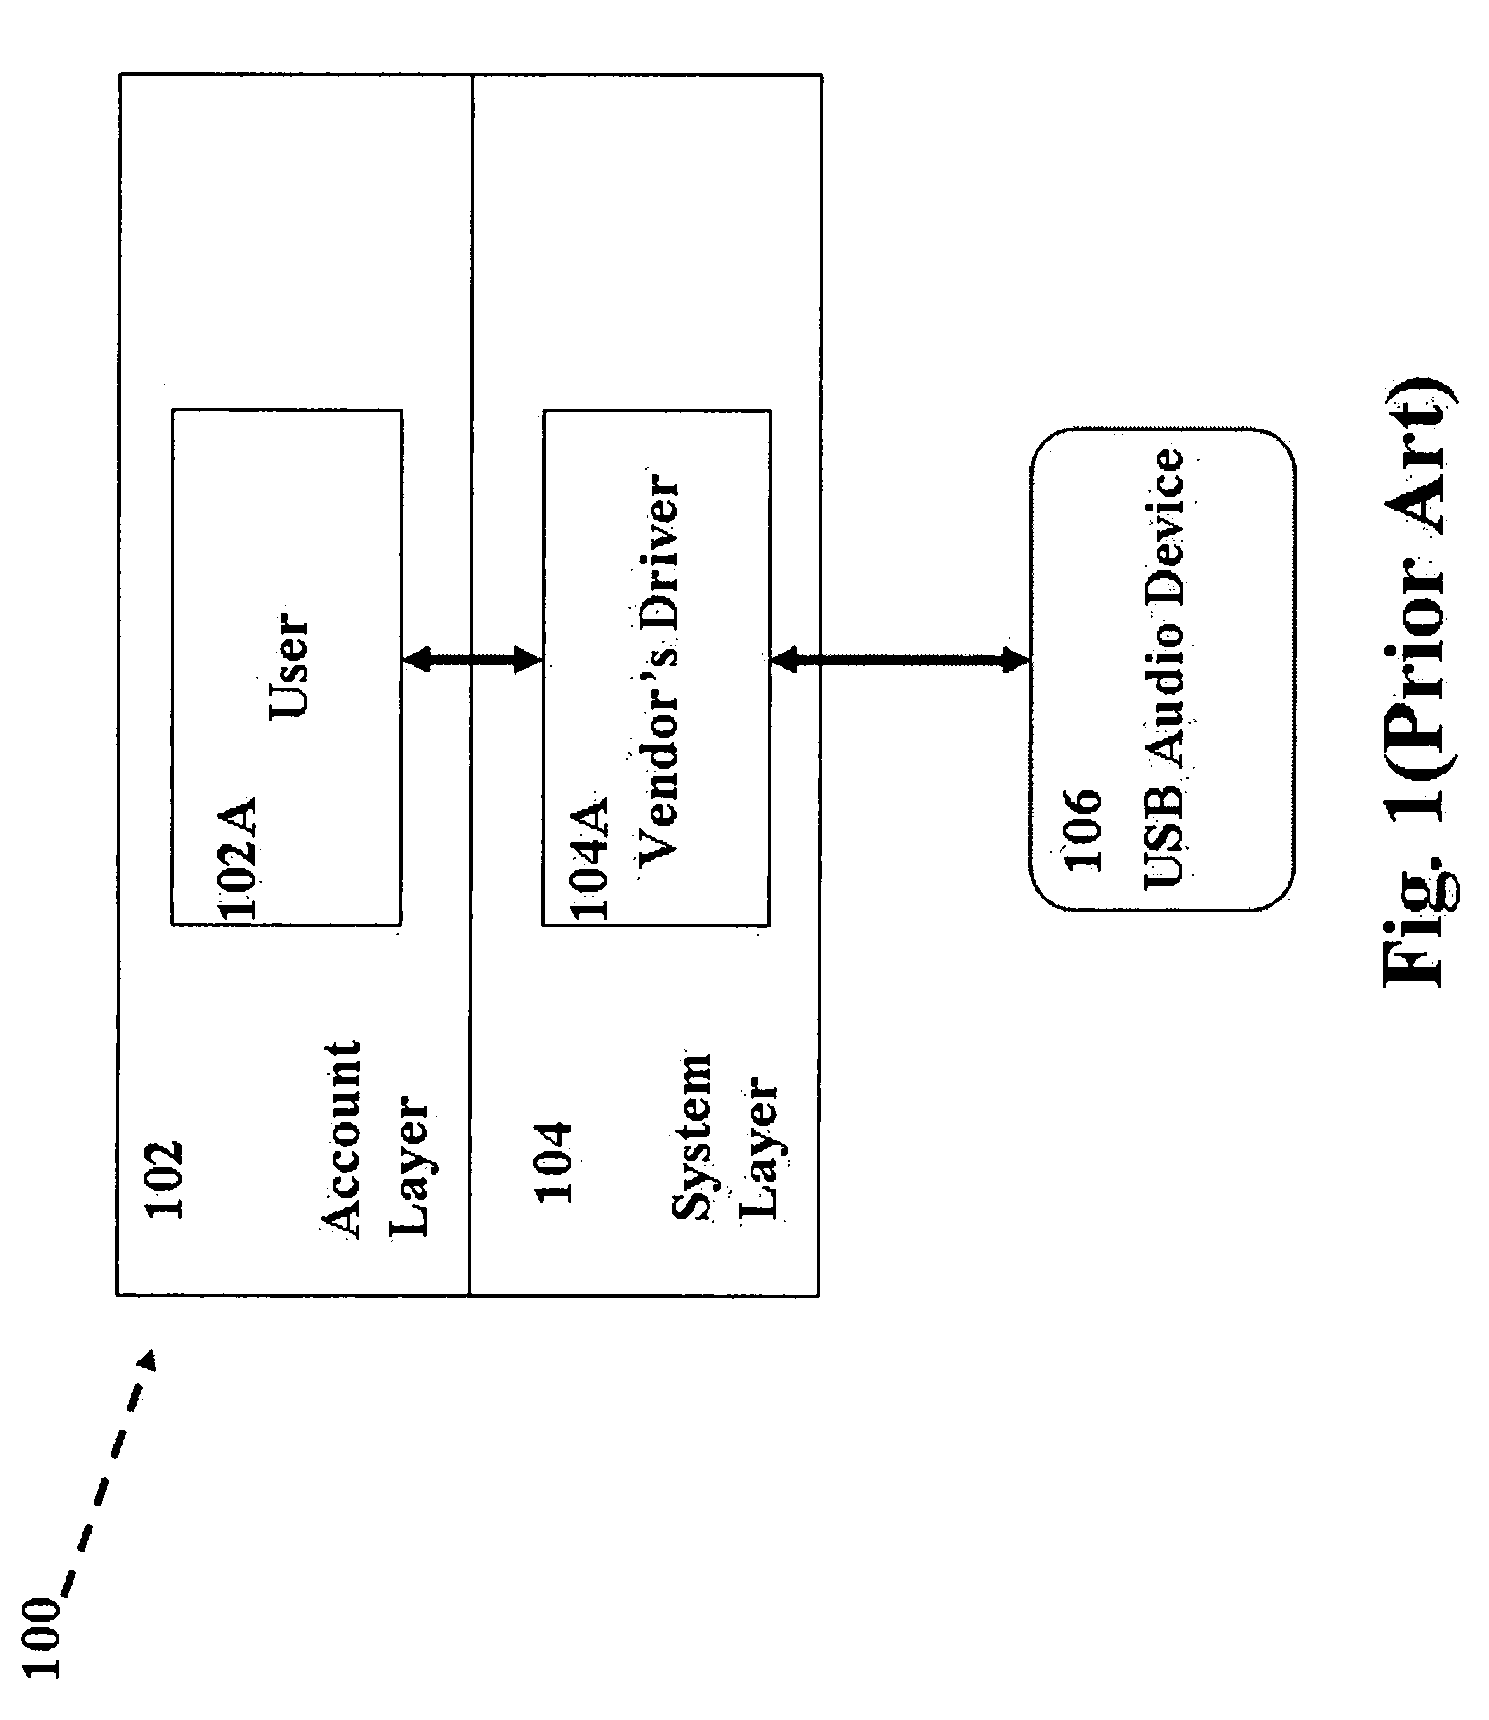 Management system for USB audio device cluster